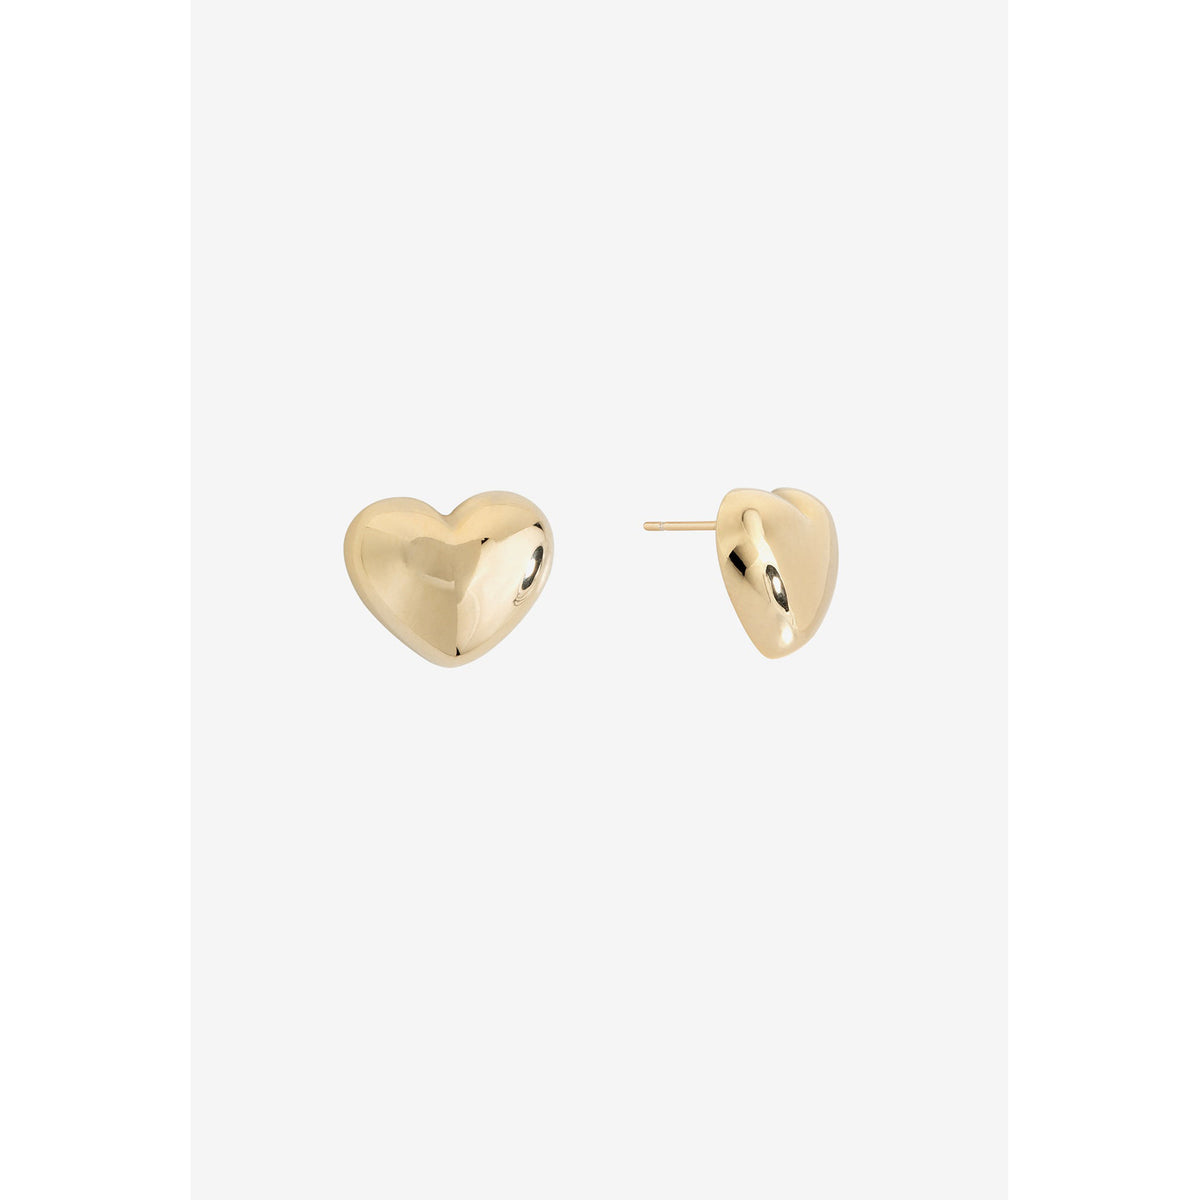 Shashi Jewelry Lucy Heart Studs in Gold